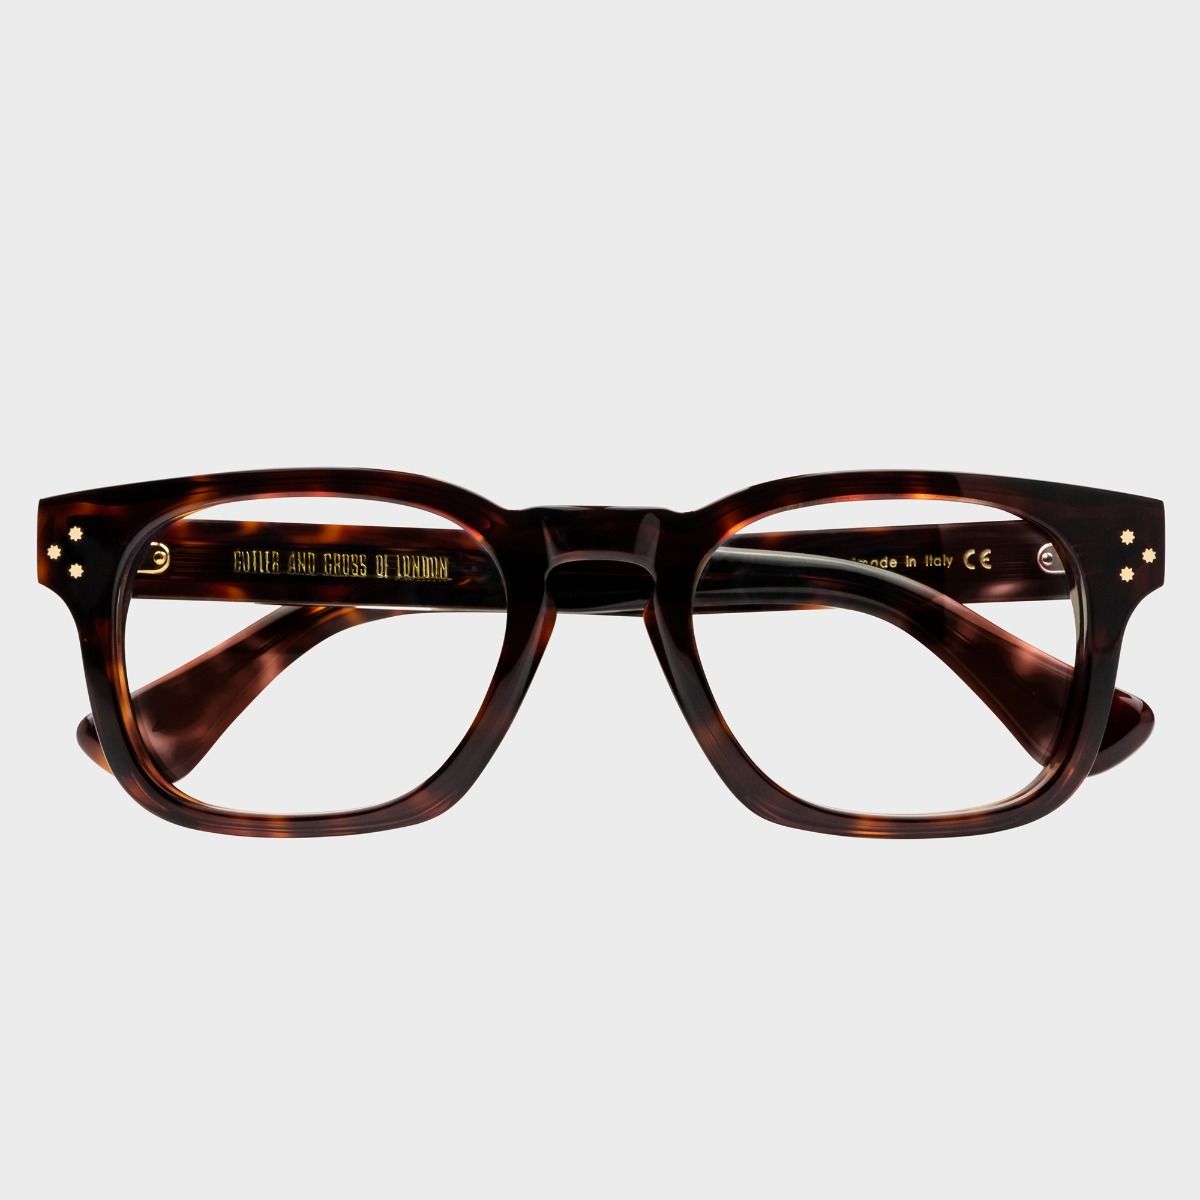 Cutler and Gross, 9768 Optical Square Glasses - Dark Turtle